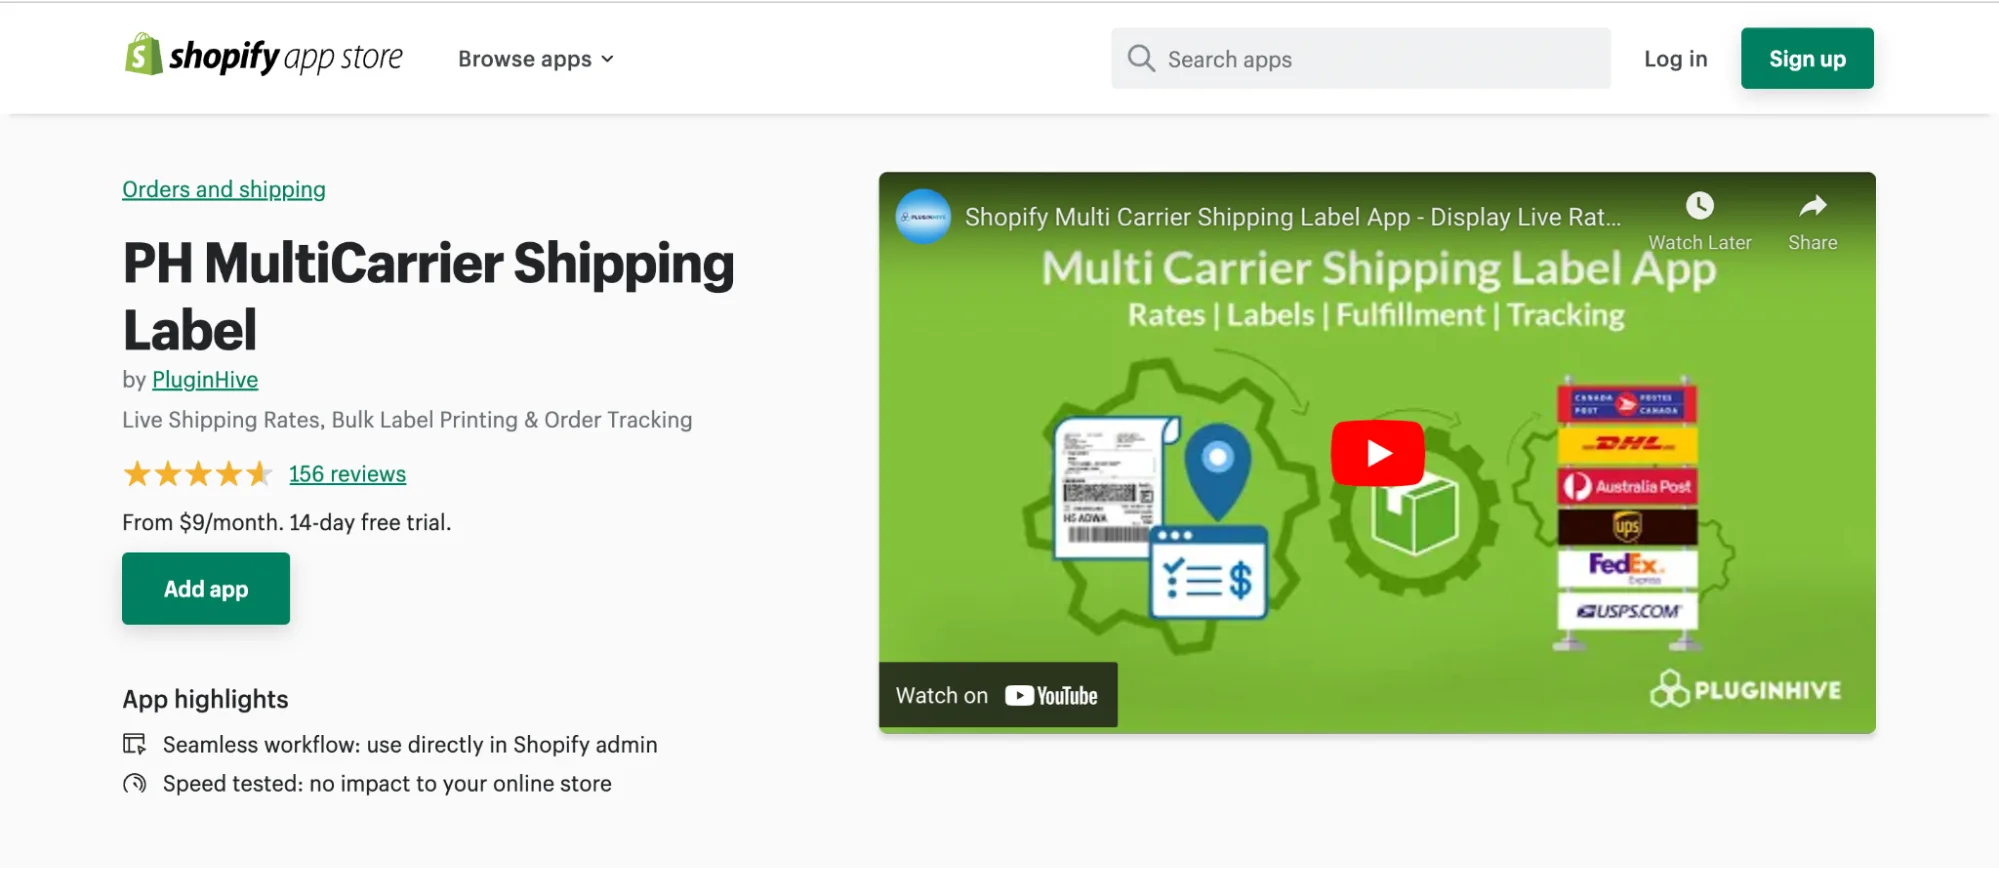 How does Shopify Shipping work